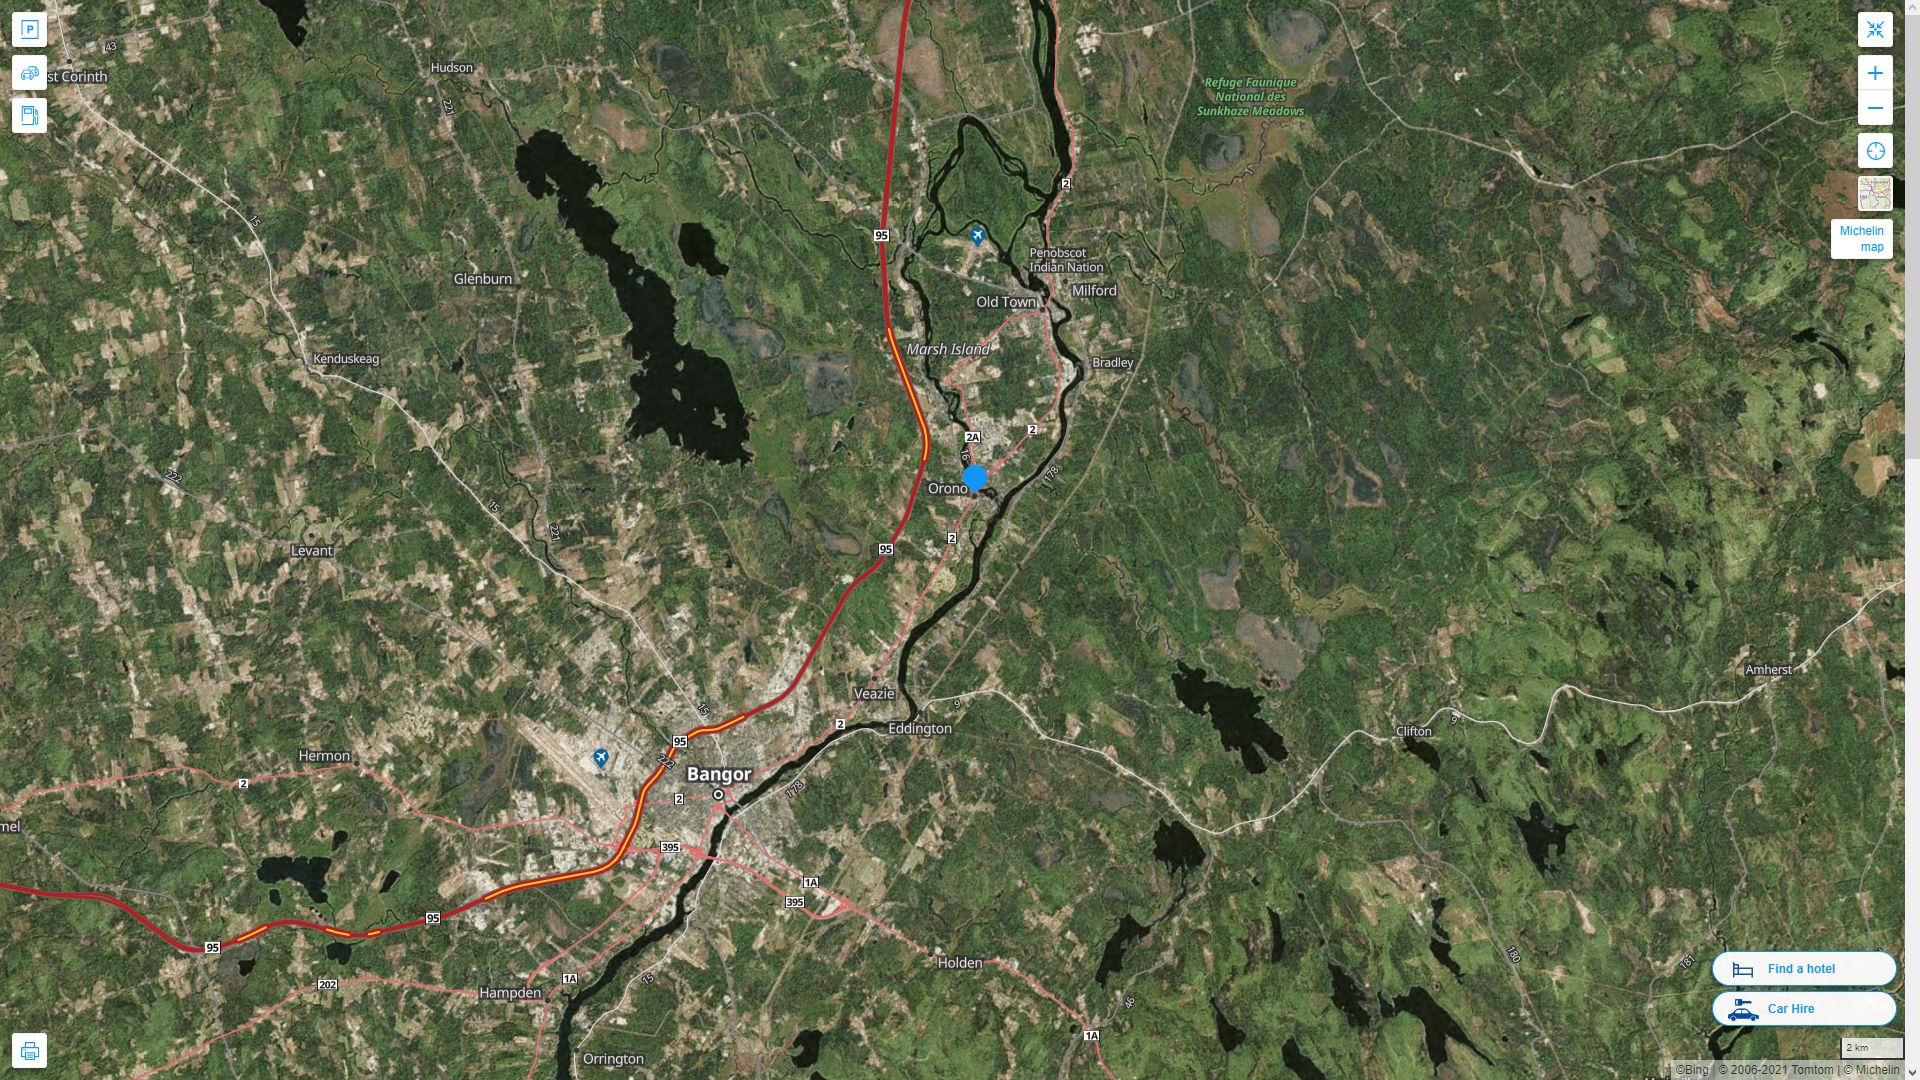 Orono Maine Highway and Road Map with Satellite View